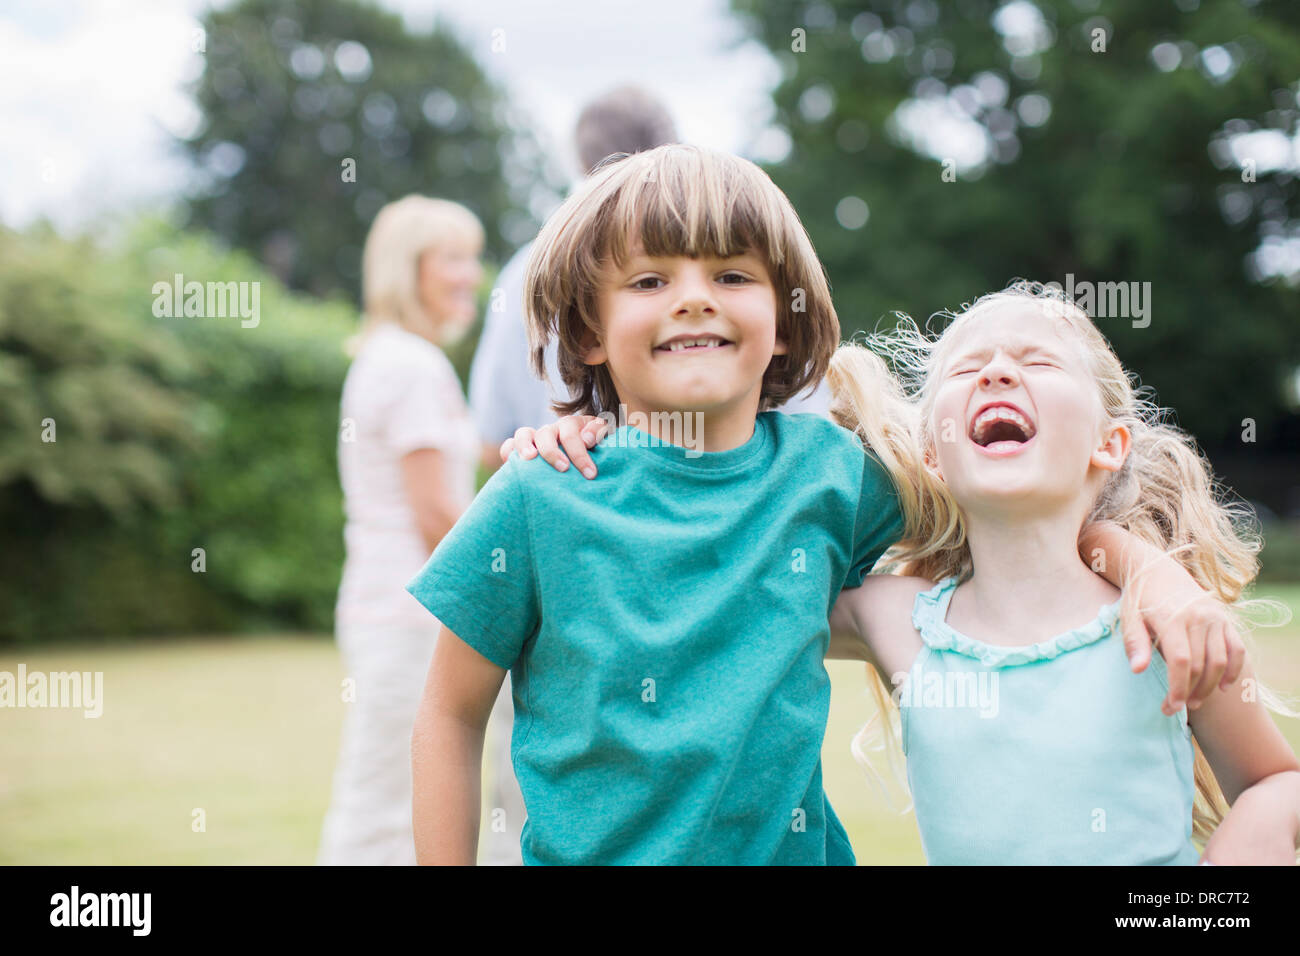 Children playing together outdoors Stock Photo